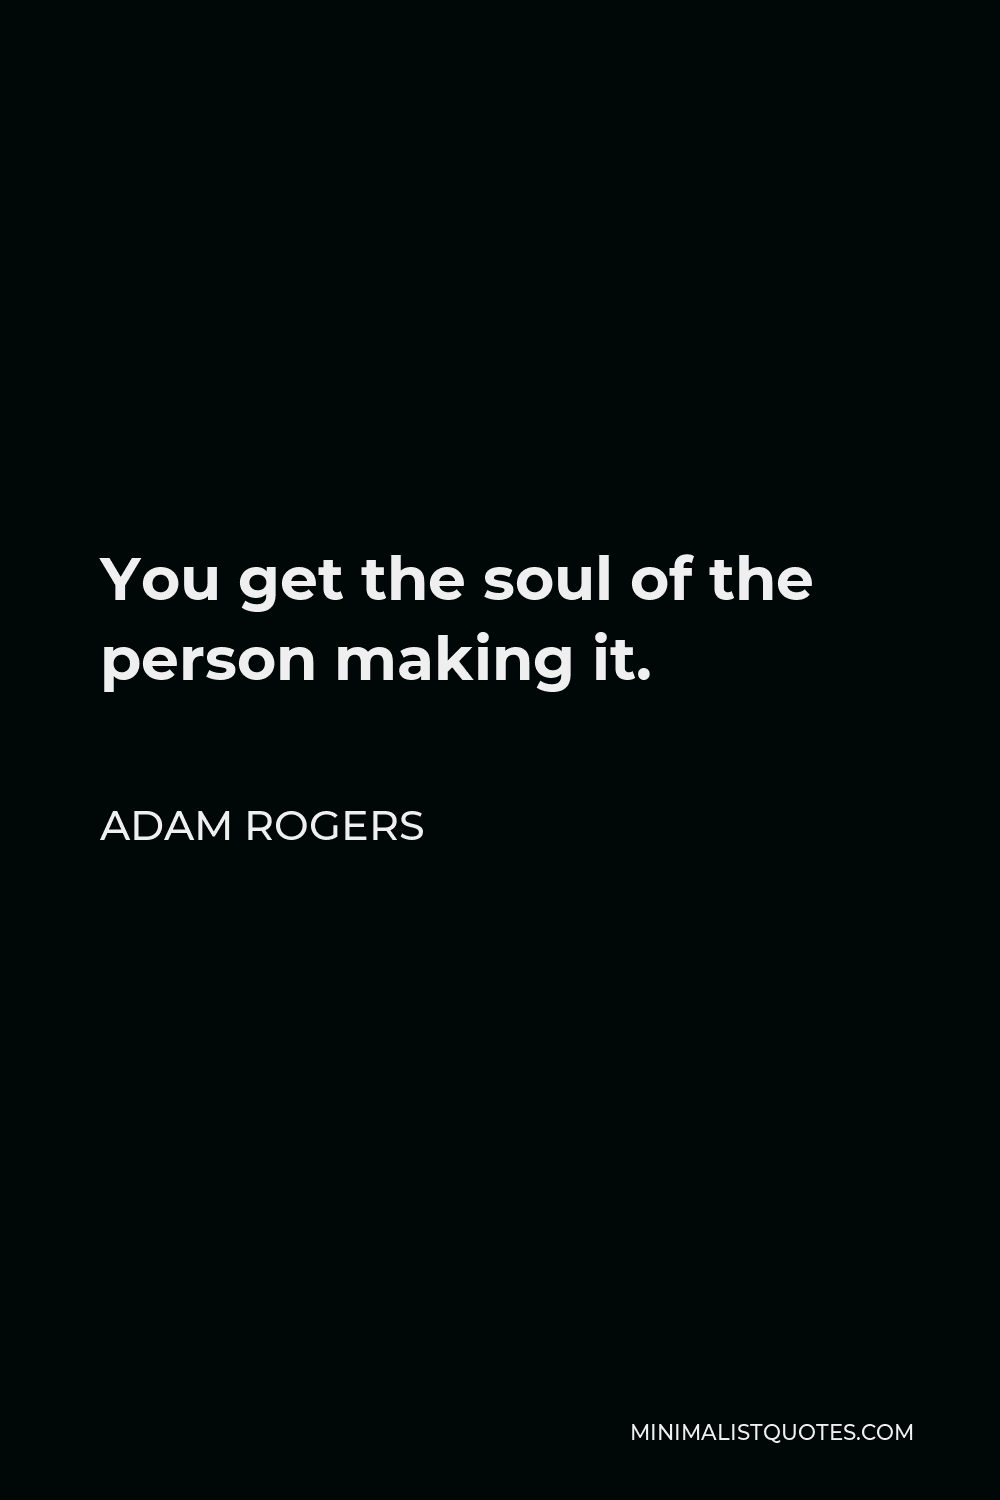 Adam Rogers Quote - You get the soul of the person making it.